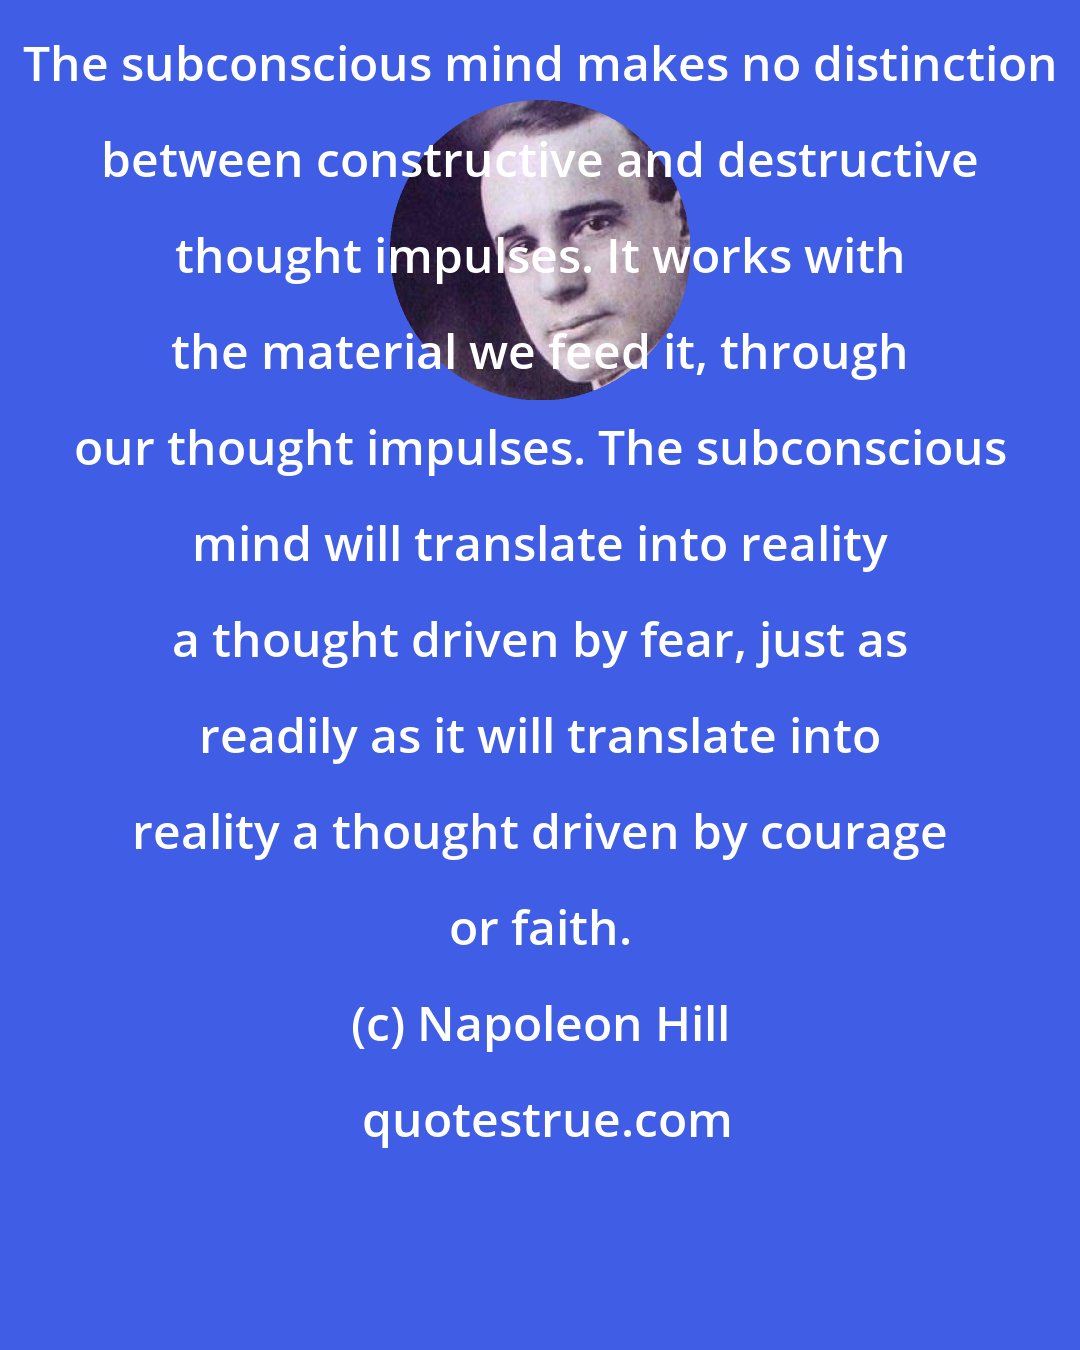 Napoleon Hill: The subconscious mind makes no distinction between constructive and destructive thought impulses. It works with the material we feed it, through our thought impulses. The subconscious mind will translate into reality a thought driven by fear, just as readily as it will translate into reality a thought driven by courage or faith.